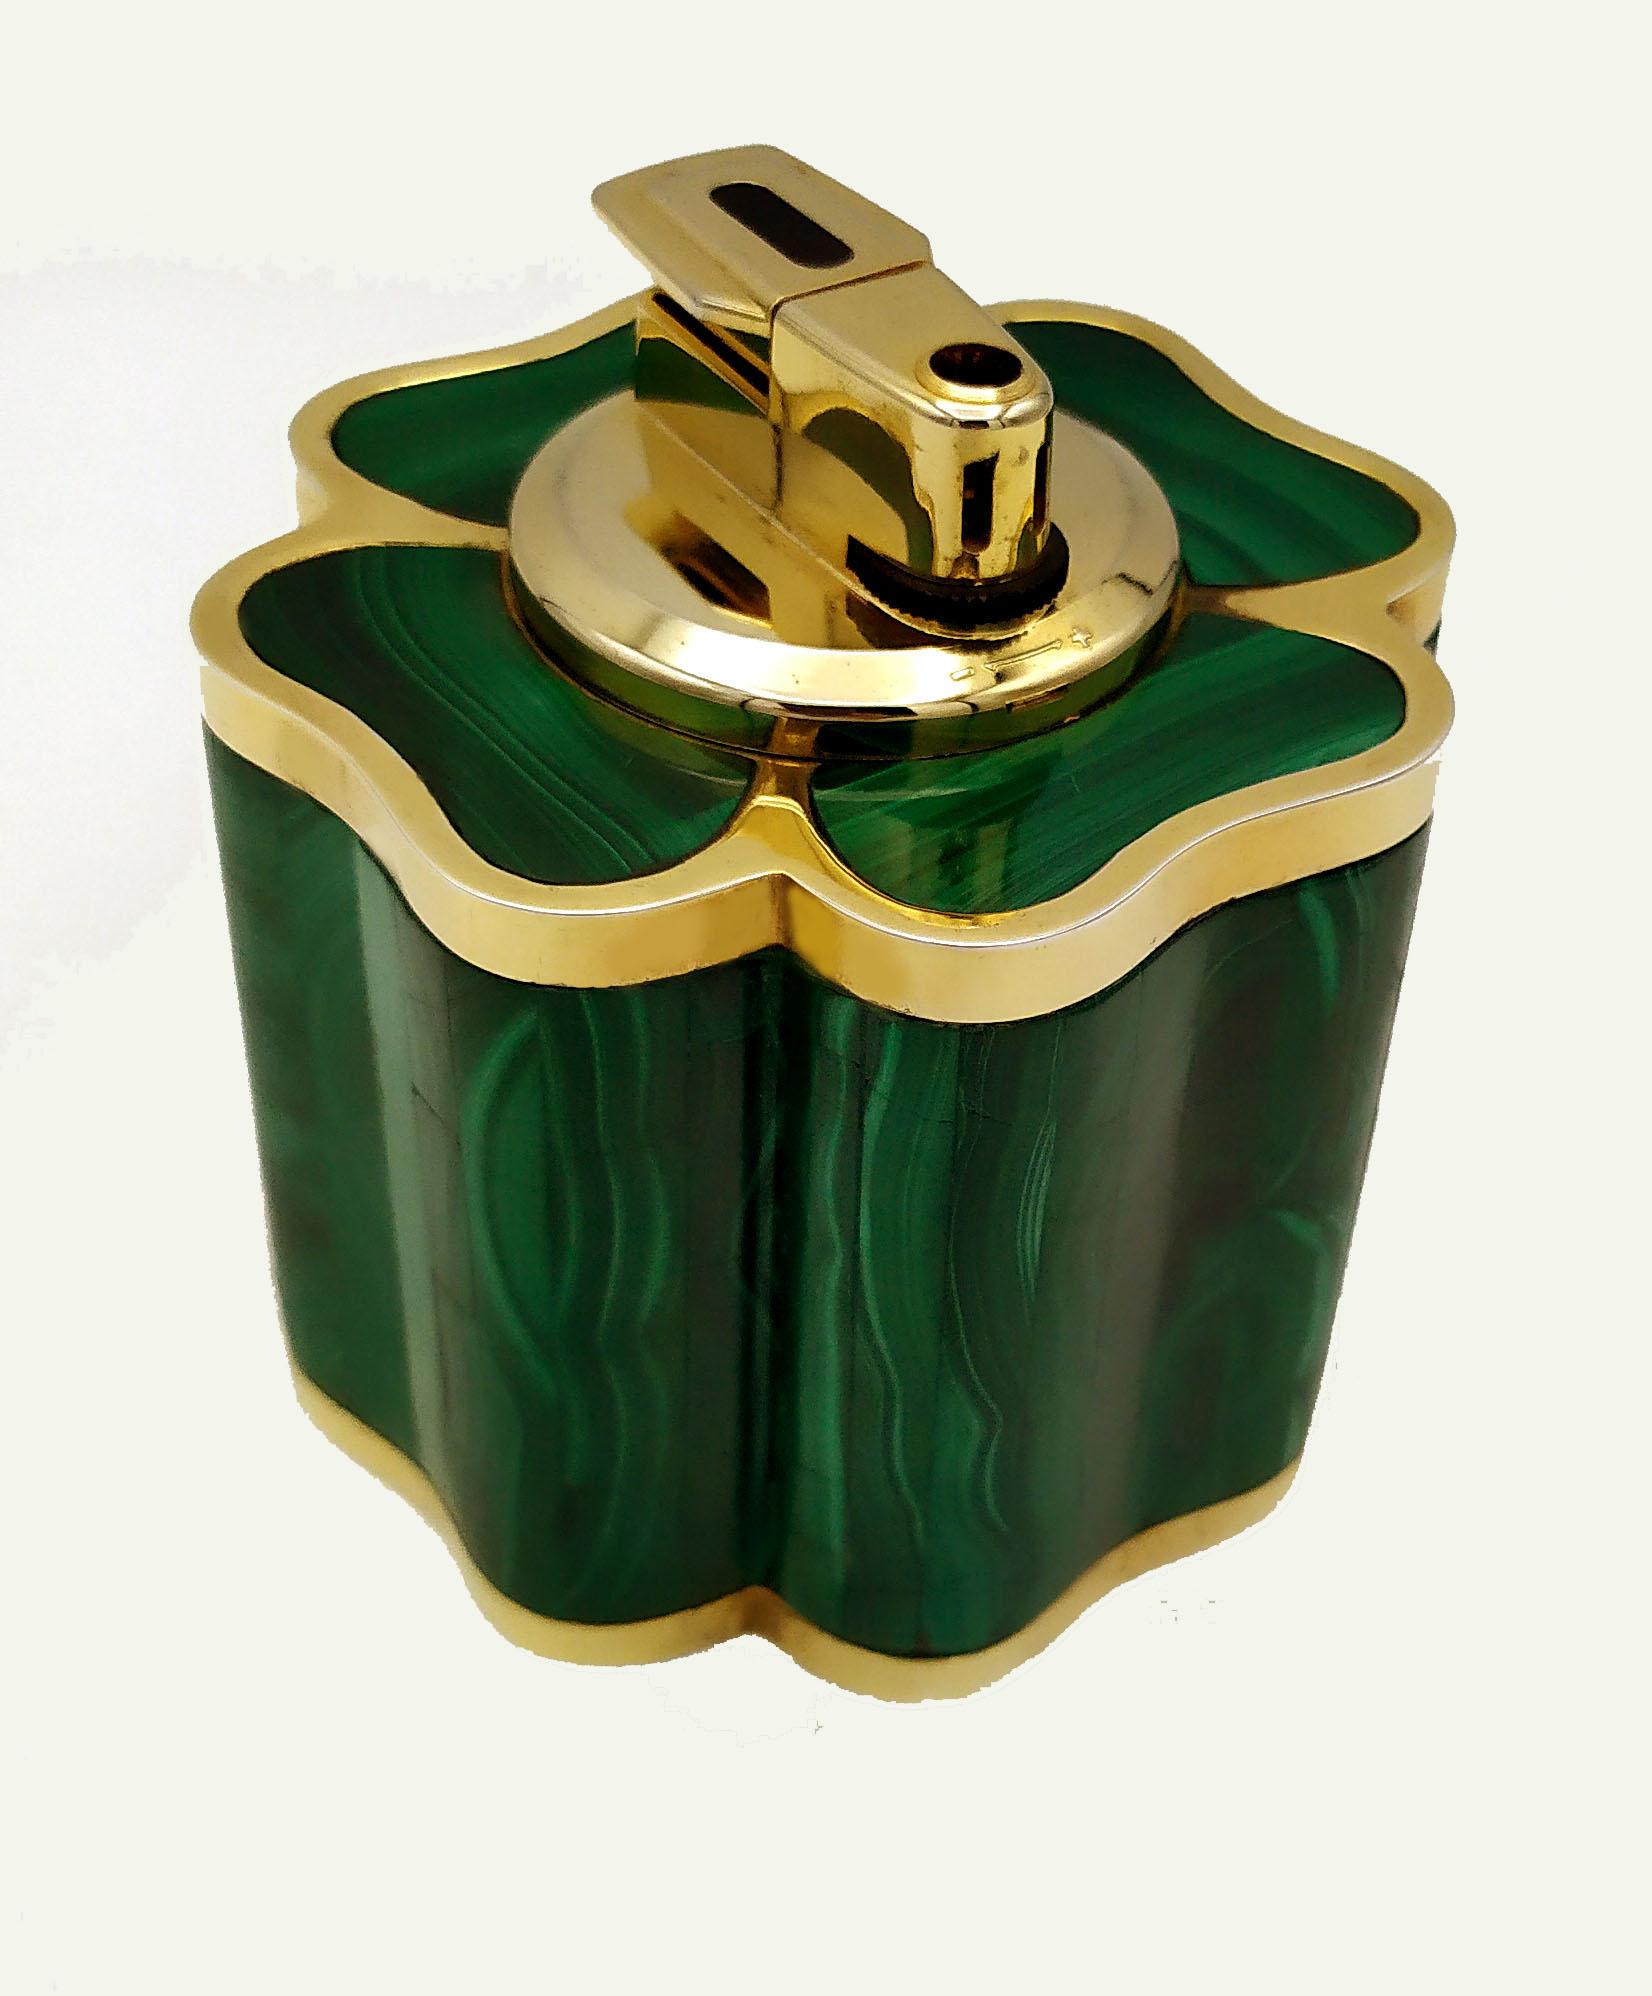 Table cigar lighter in the shape of a four-leaf clover with frames in 925/1000 sterling silvergold plated and real malachite stone. Piezoelectric mechanism. Dimensions cm. 8 x 8 cm high. 7. Silver weight gr. 54. Designed by Giorgio Salimbeni in 1975